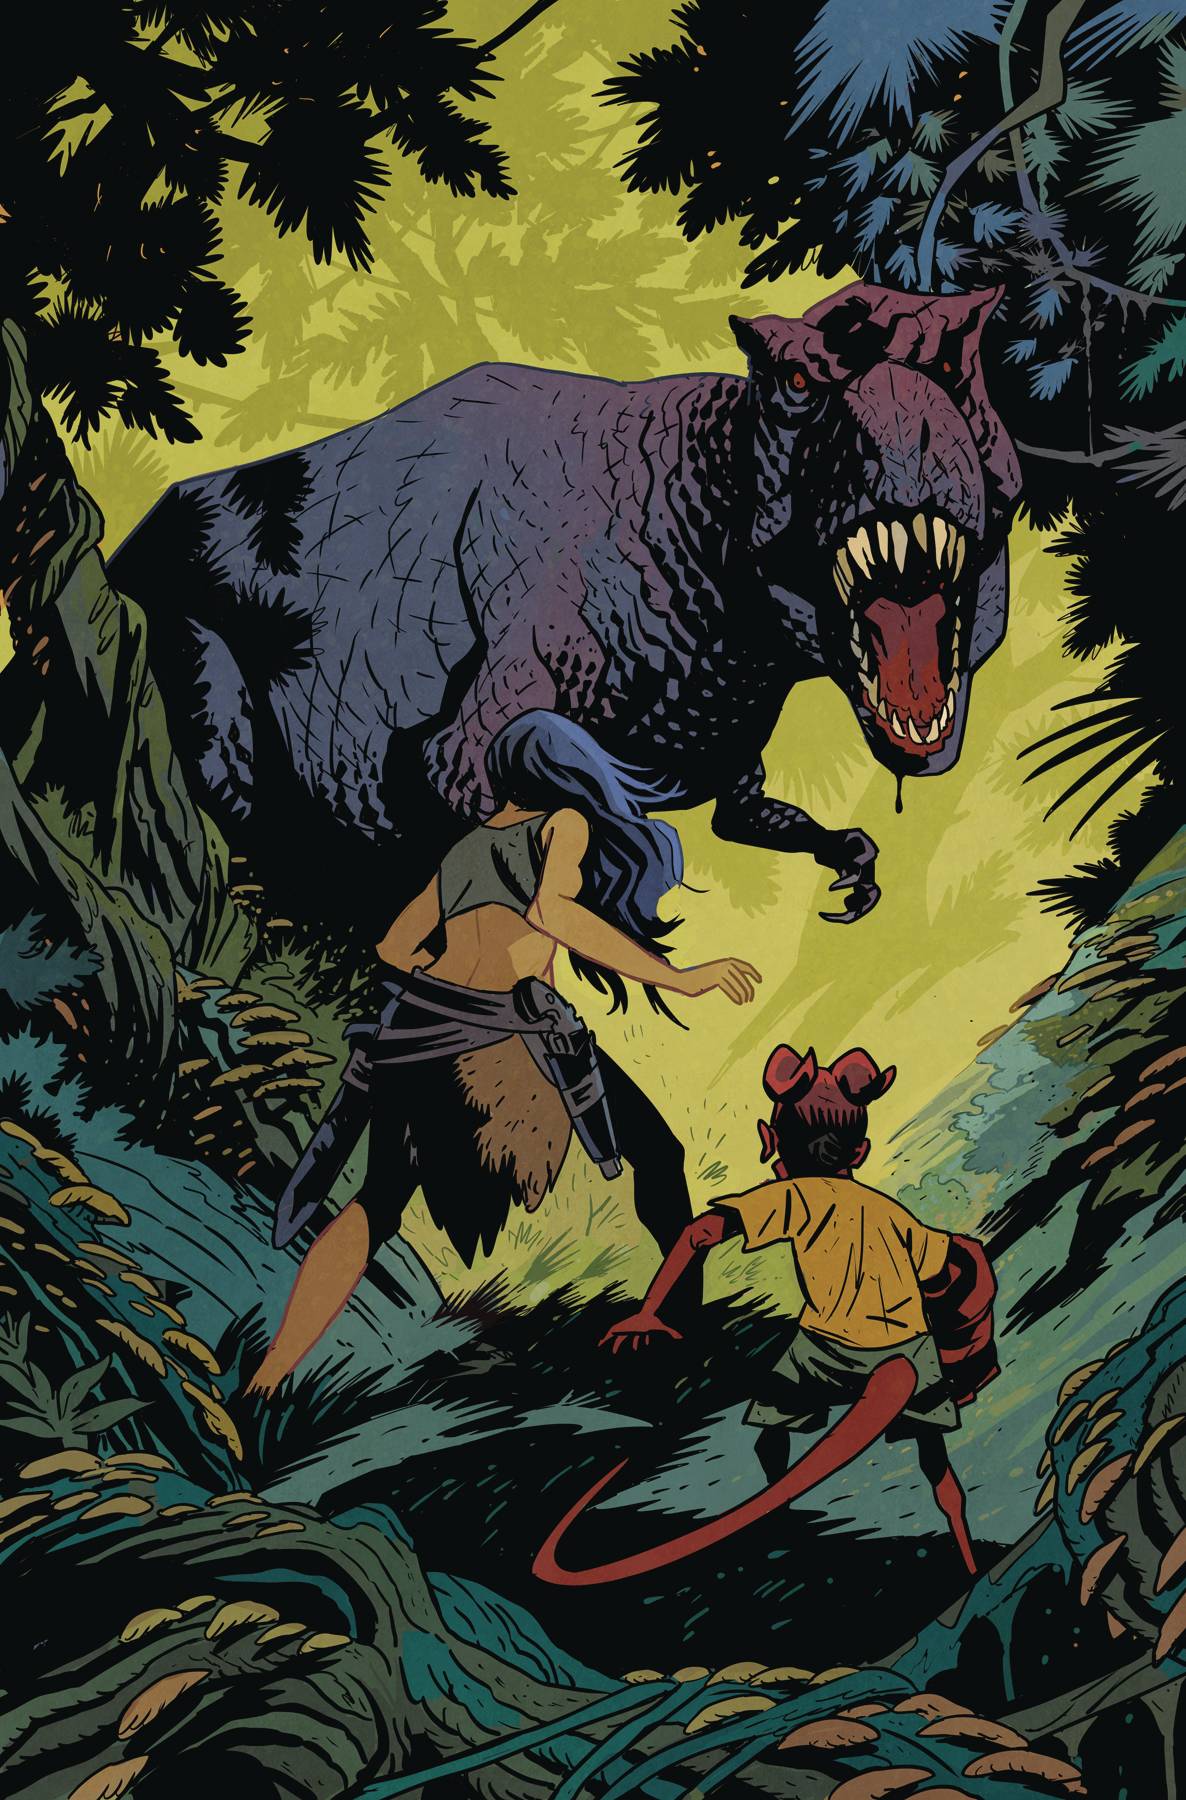 YOUNG HELLBOY THE HIDDEN LAND #2 (OF 4) CVR A SMITH